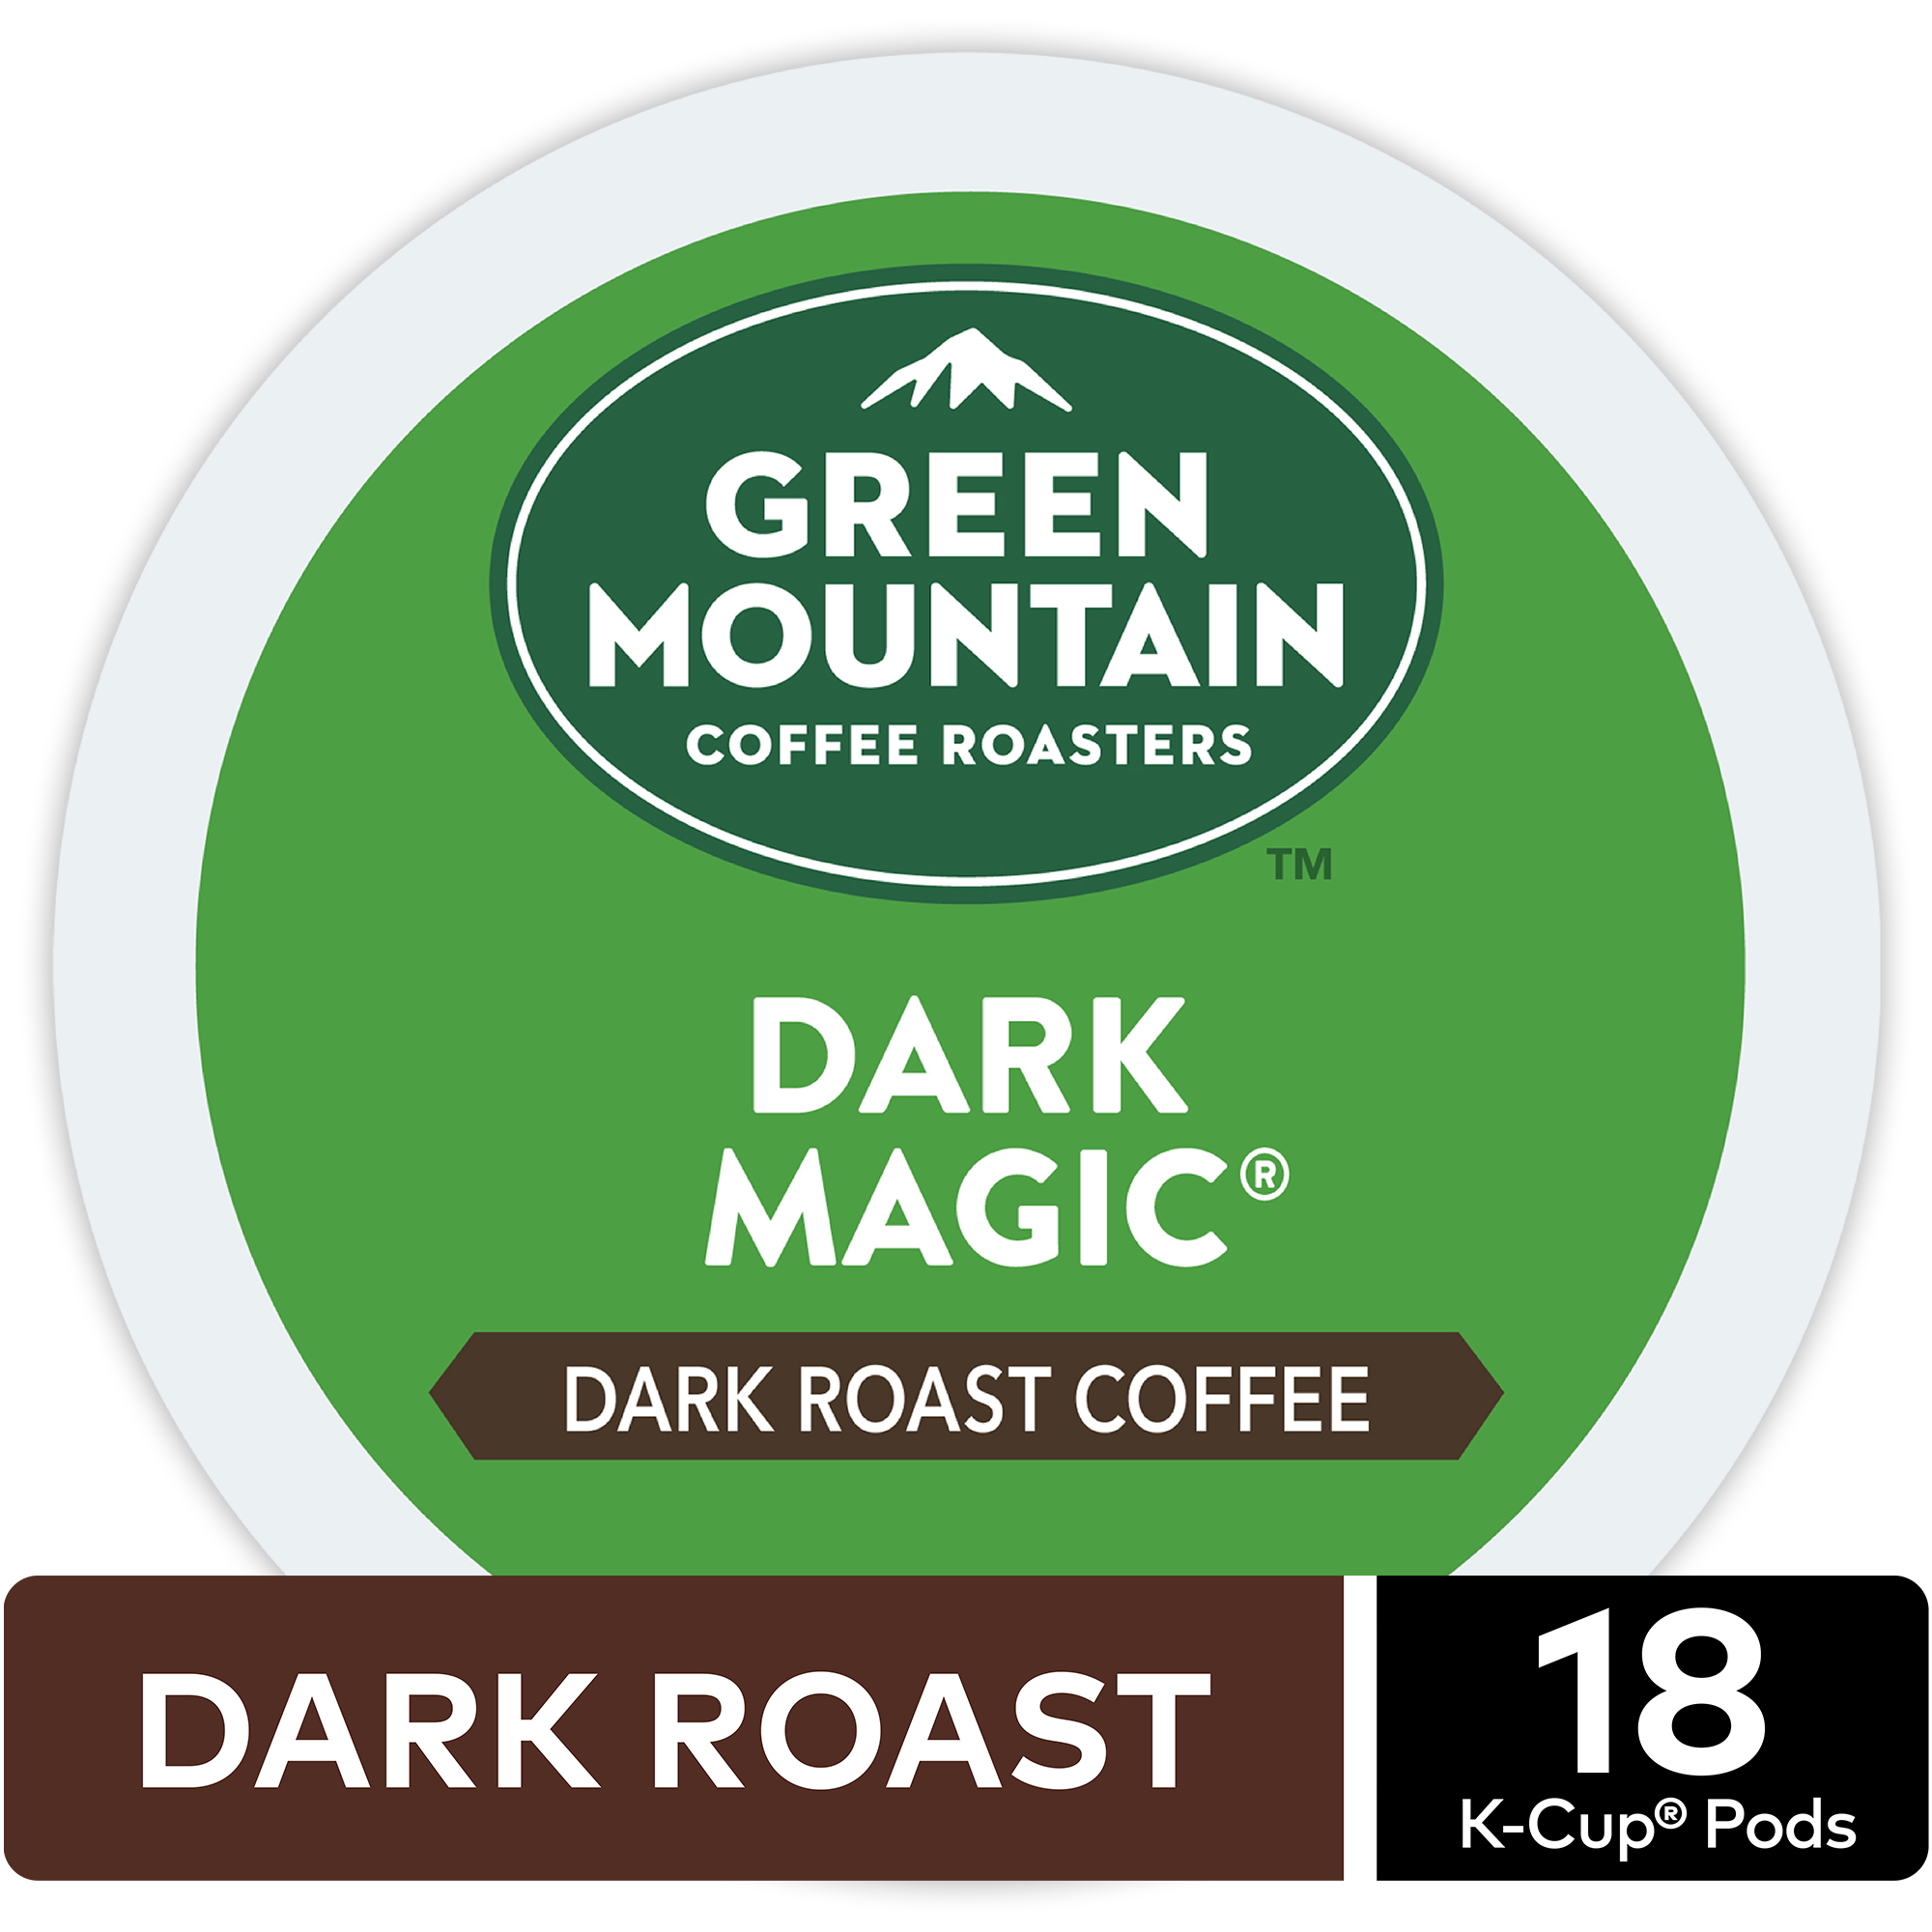 Green Mountain Coffee Dark Magic K-Cup Pods, Dark Roast, 18 Count for Keurig Brewers - image 3 of 9